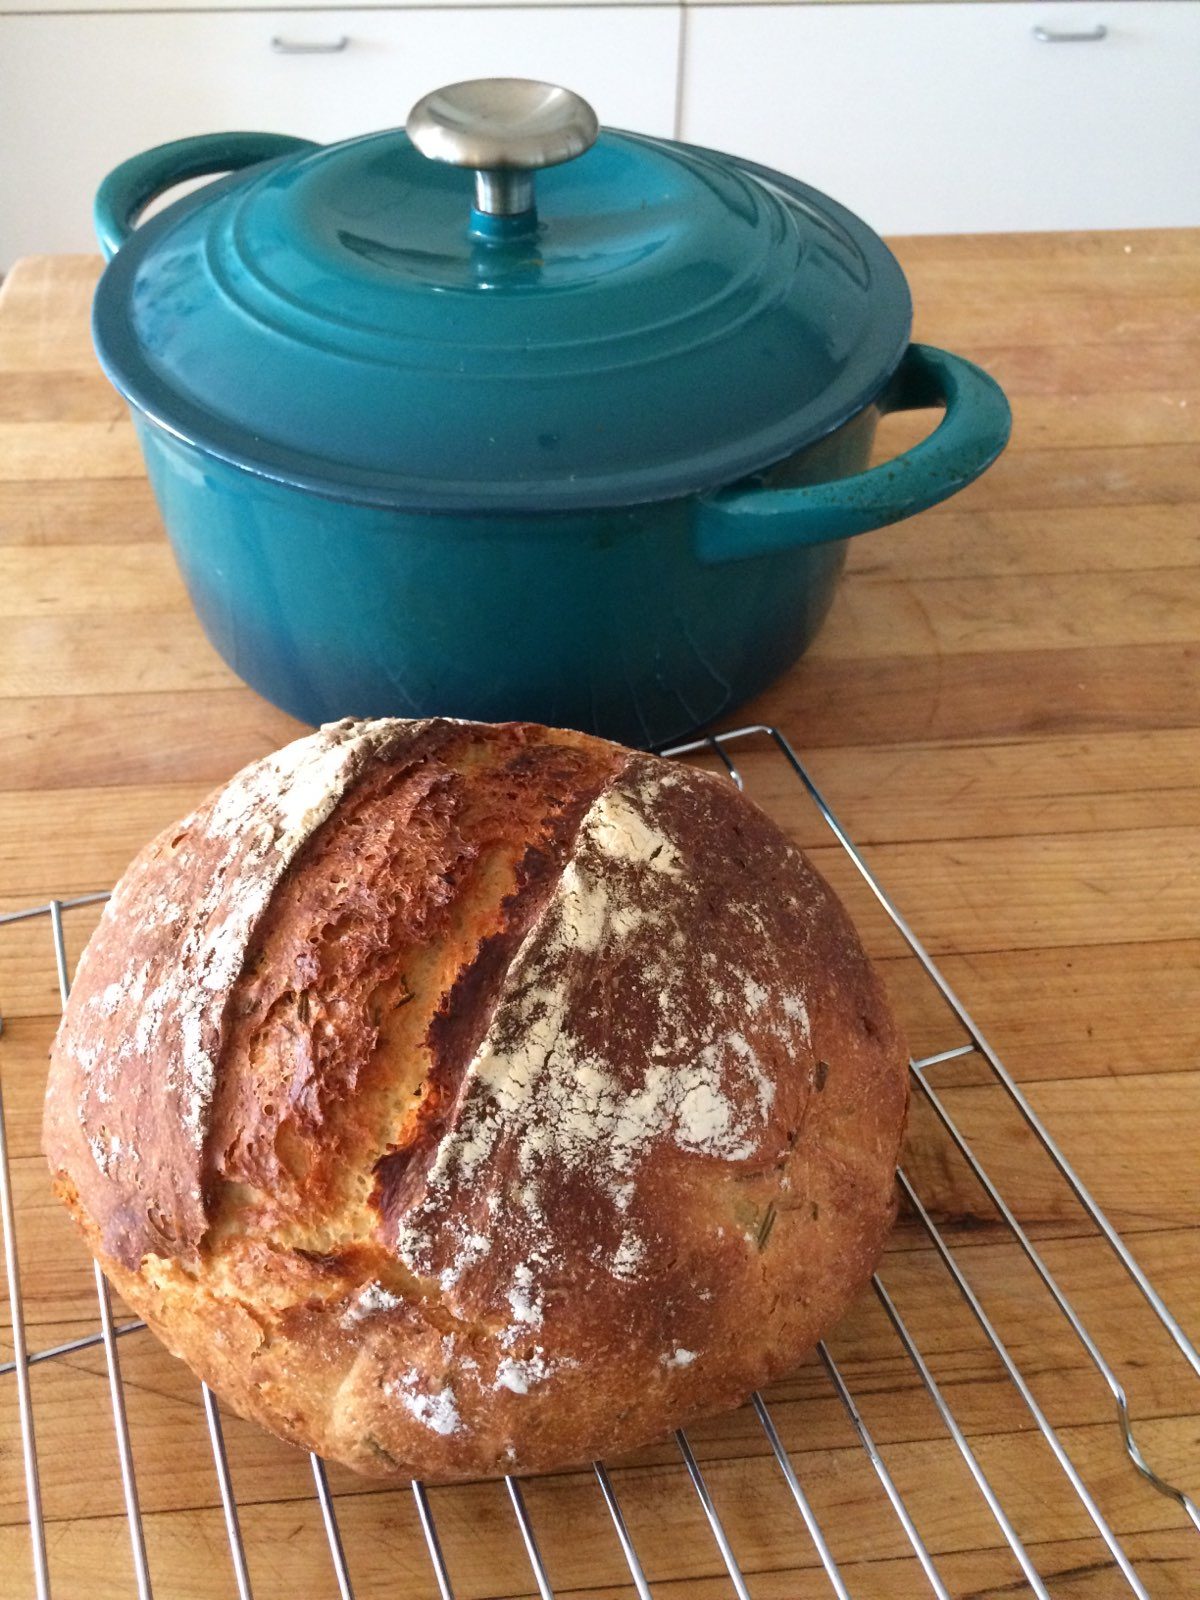 Photo of a round loaf of freshly baked bread next to a blue cast iron casserole dish.